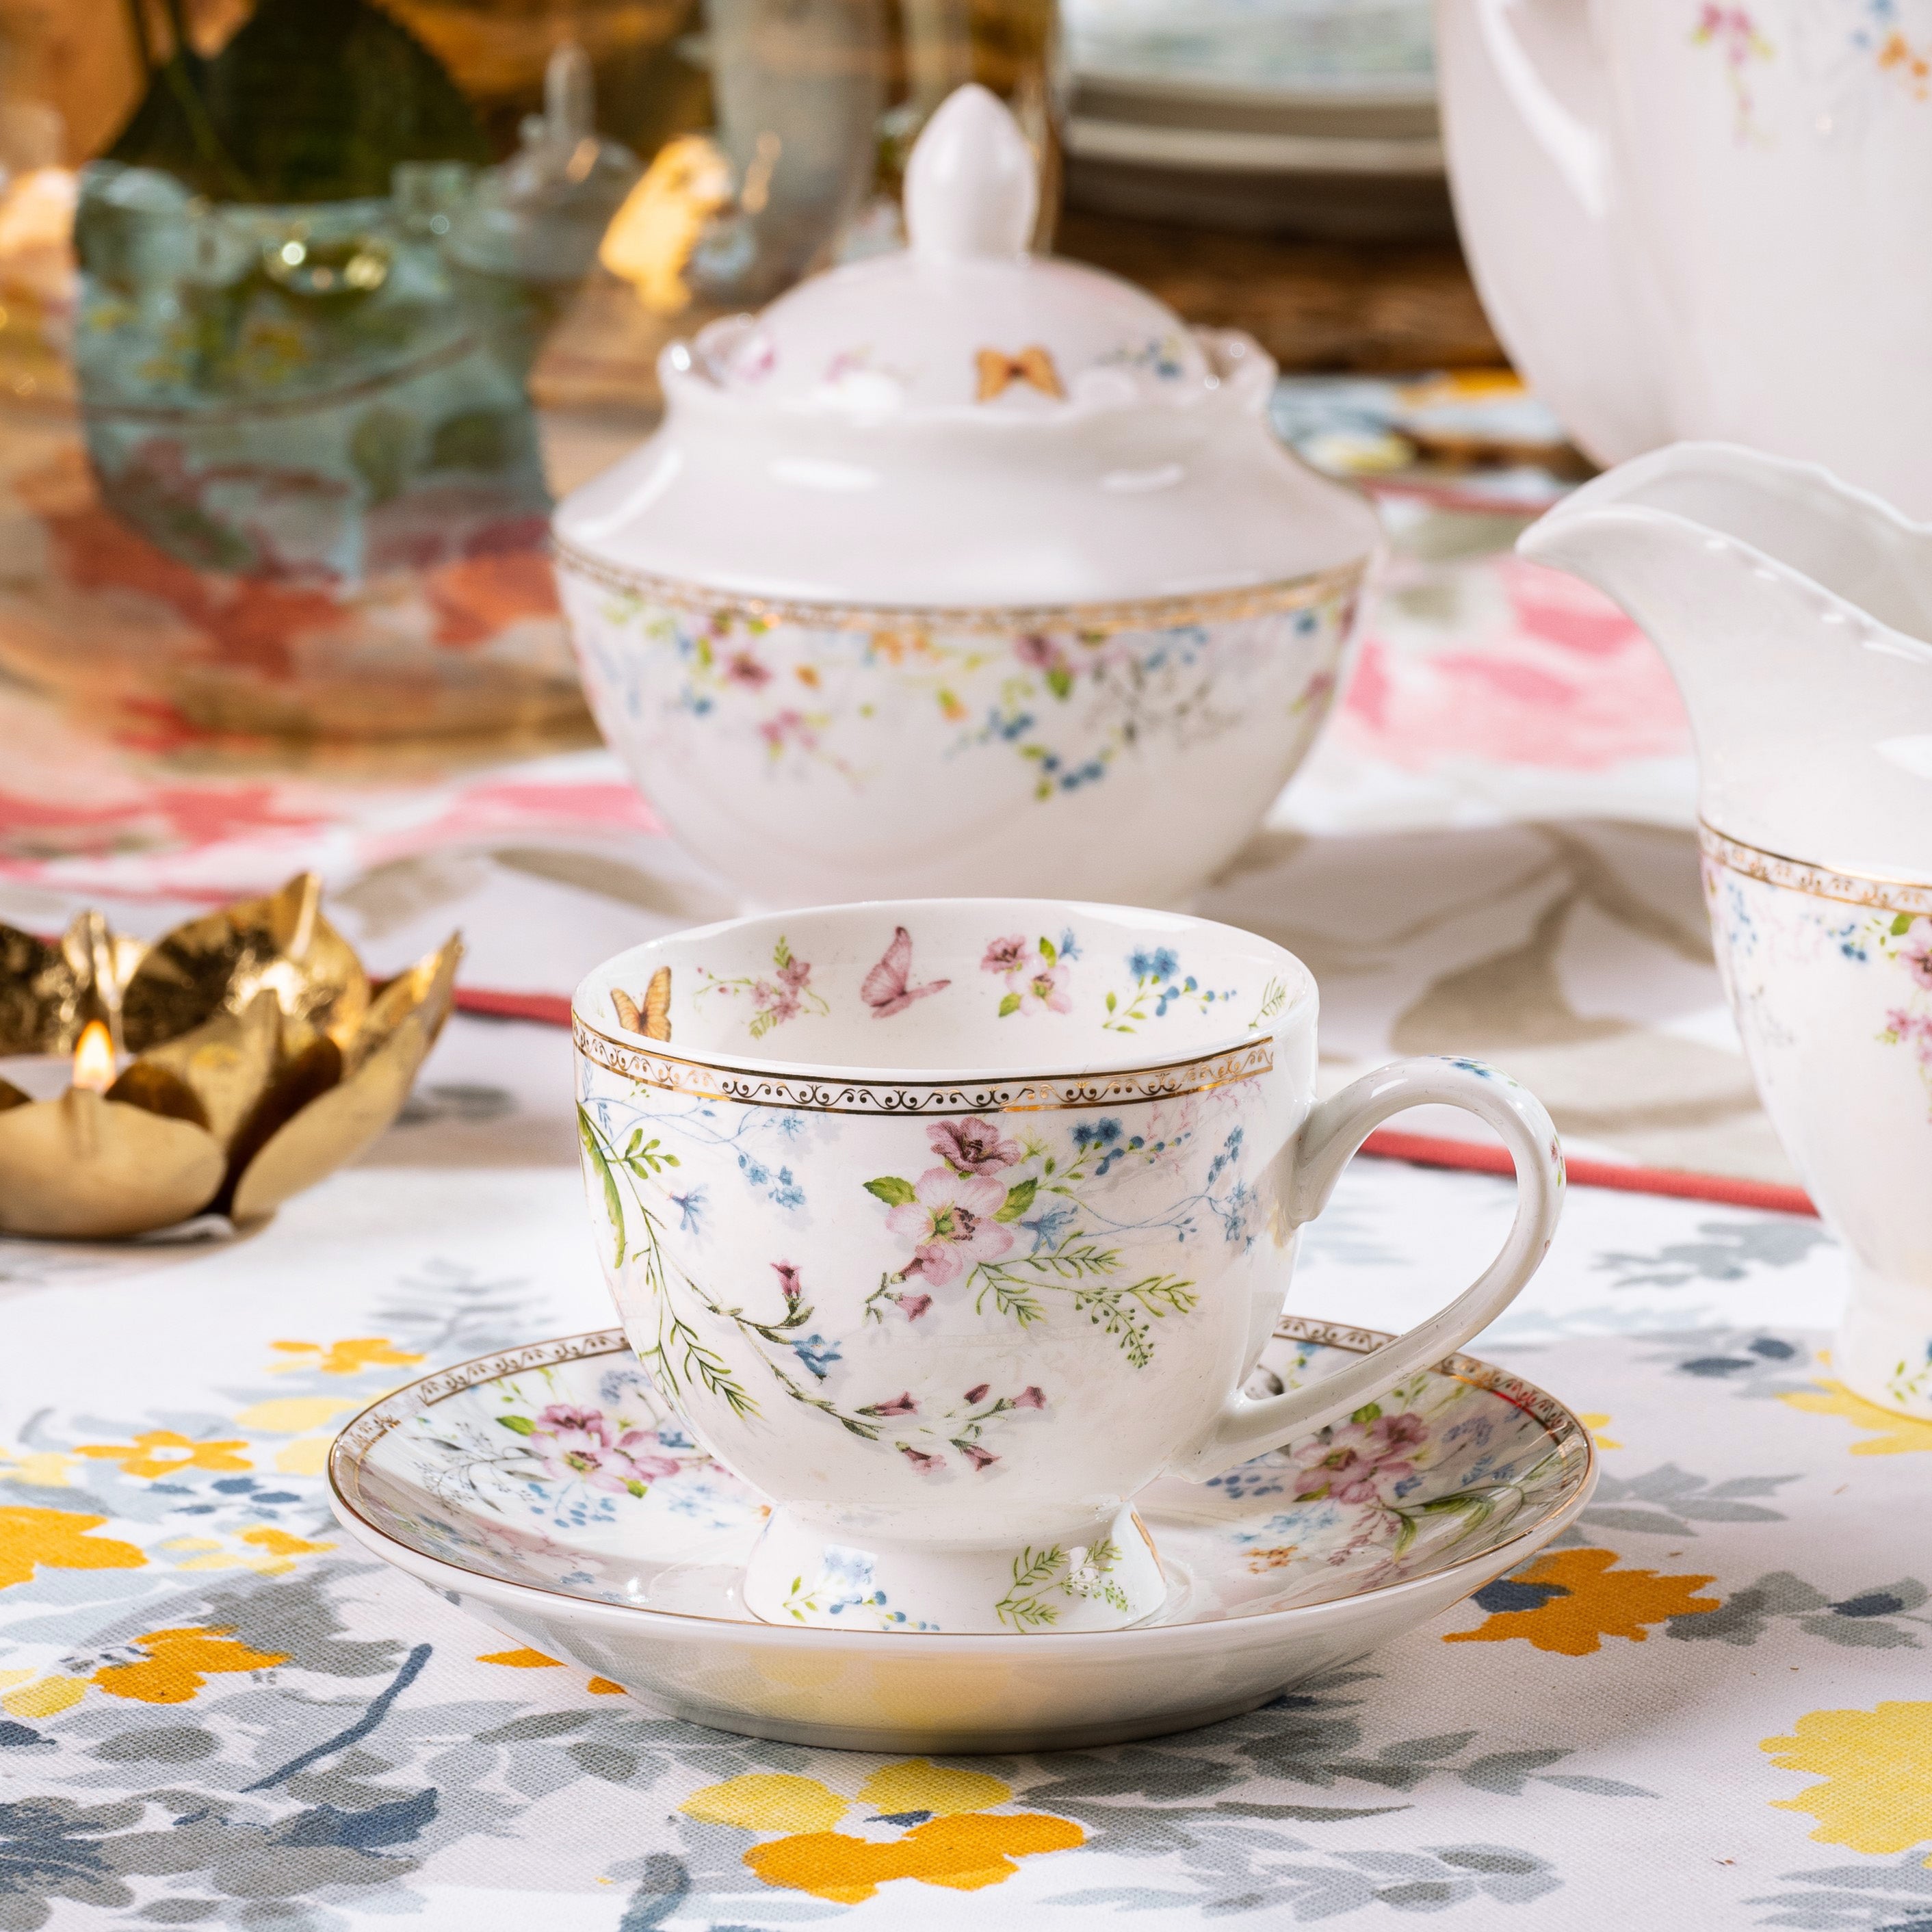 Flower Bed Cup and Saucer Set (6 Cups and 6 Saucers) – Vigneto